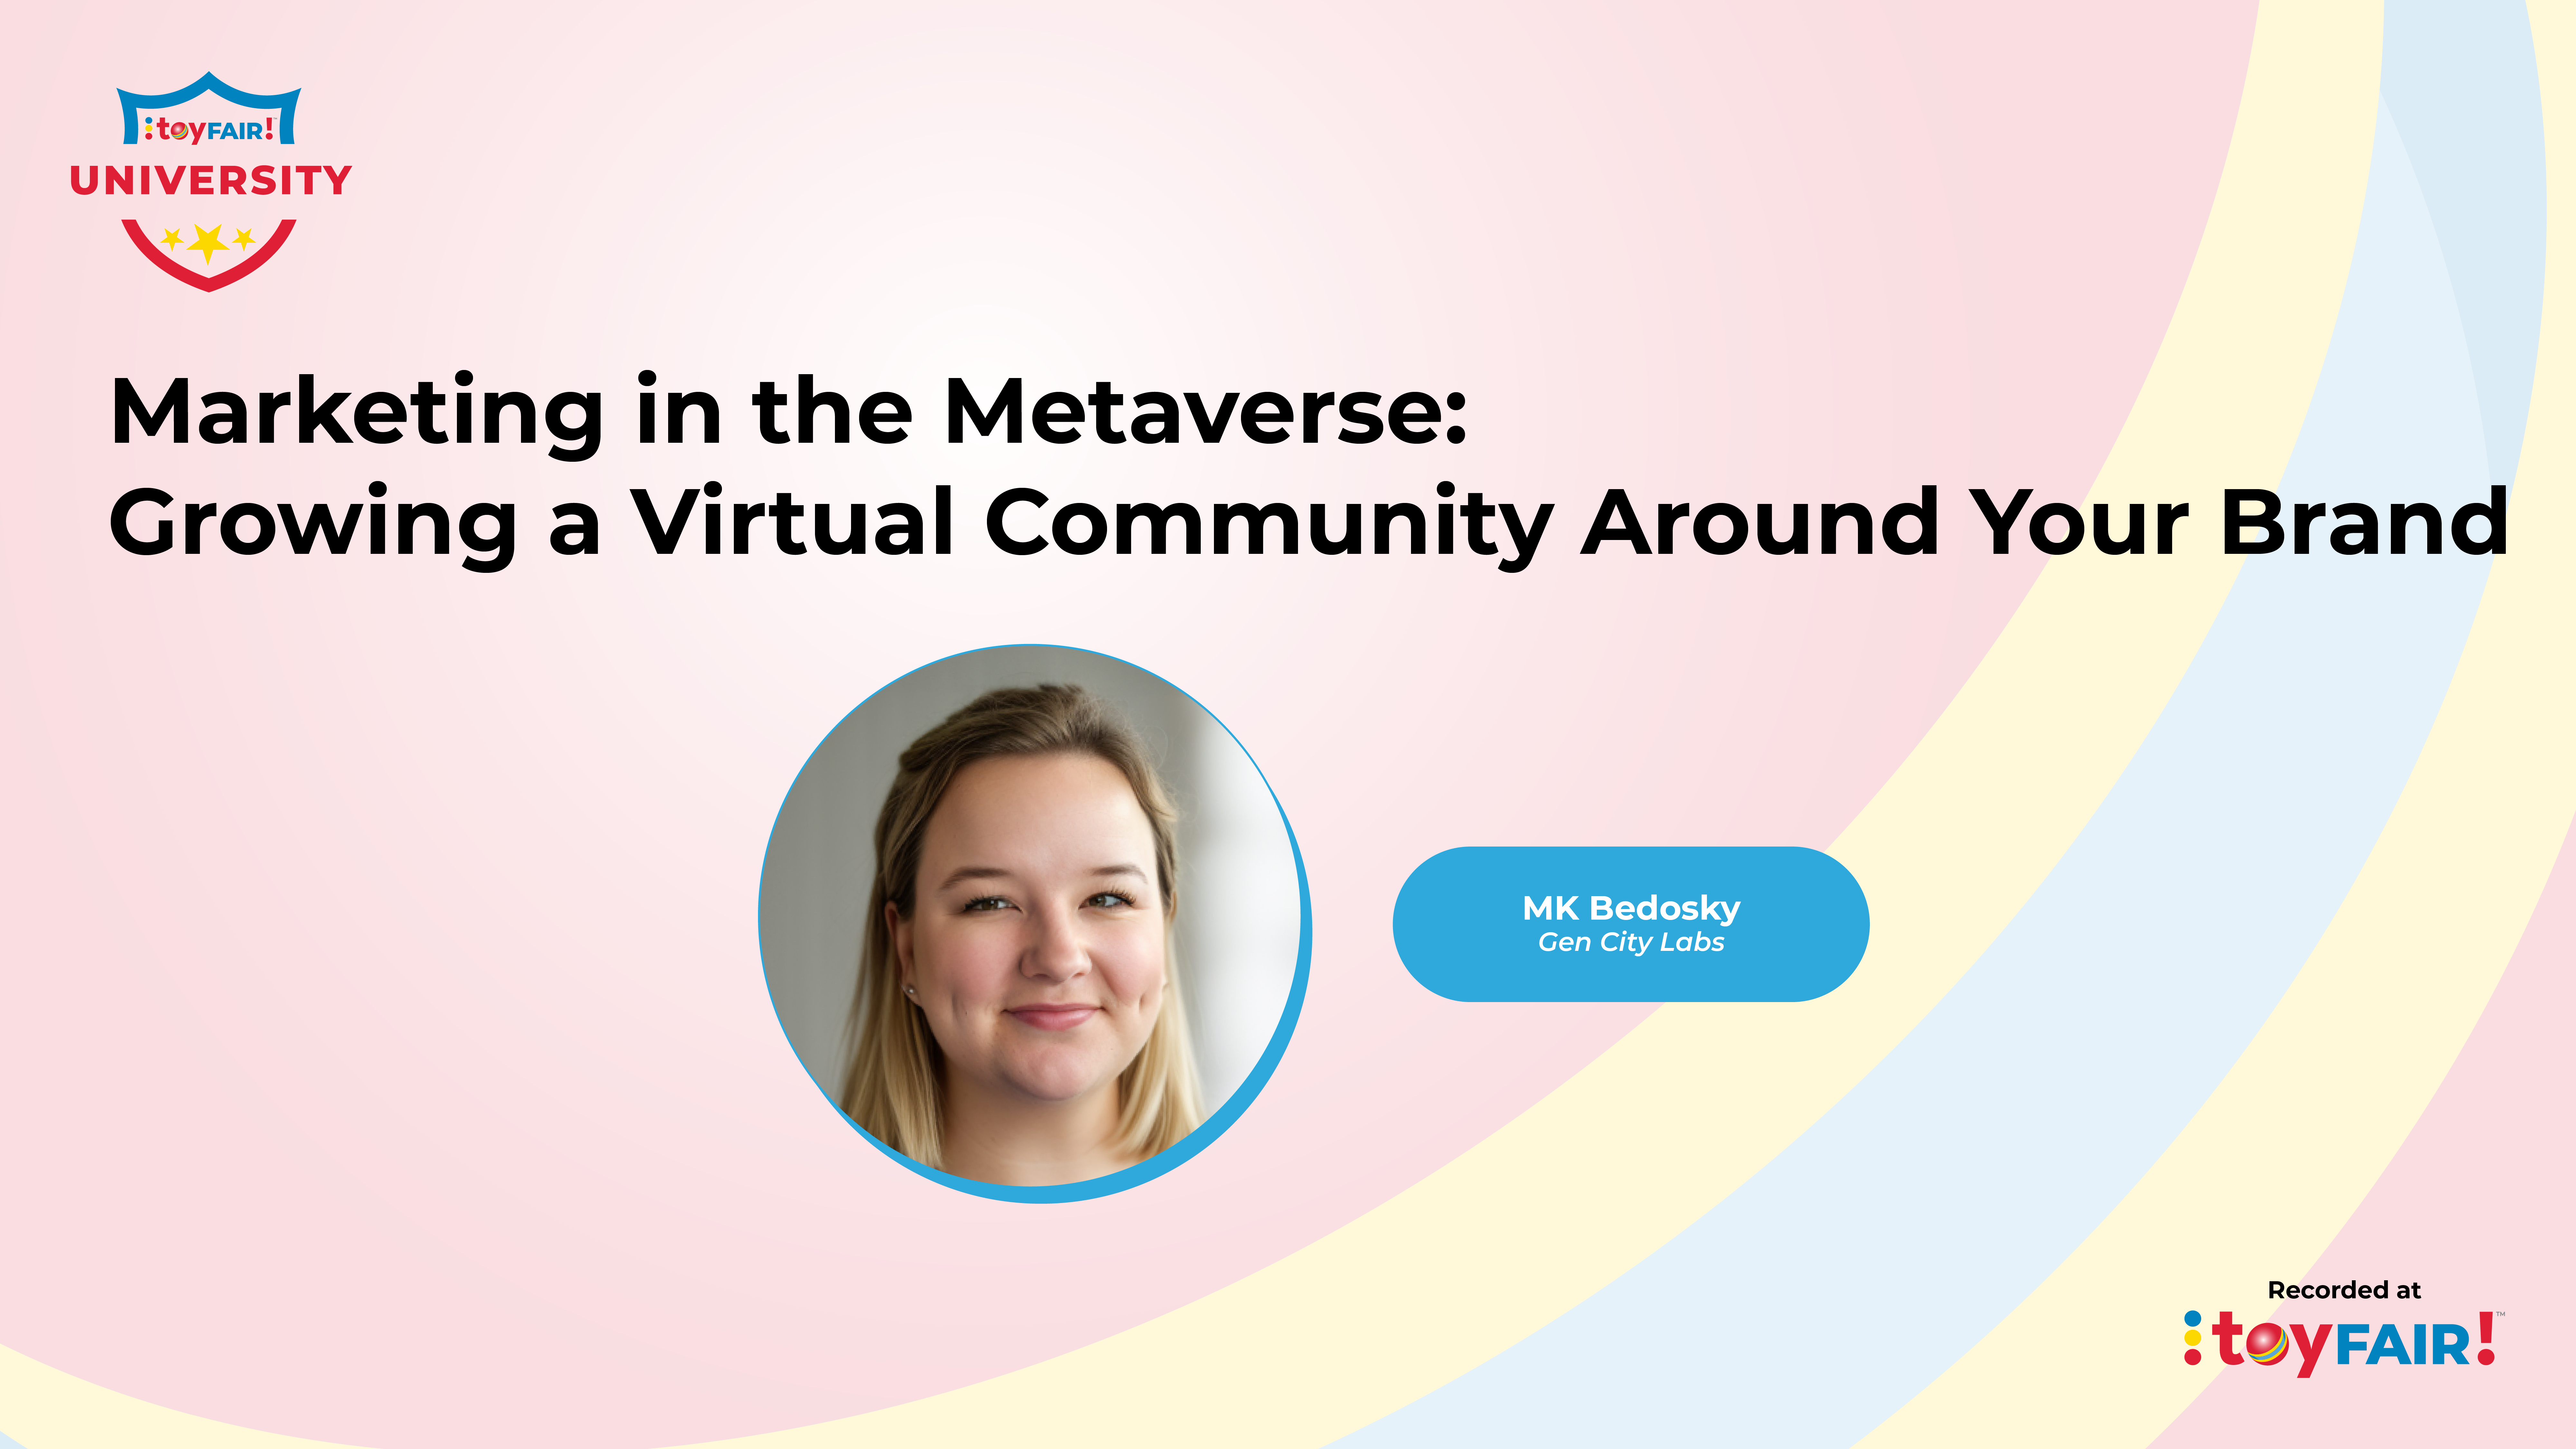 Marketing in the Metaverse: Growing a Virtual Community Around Your Brand